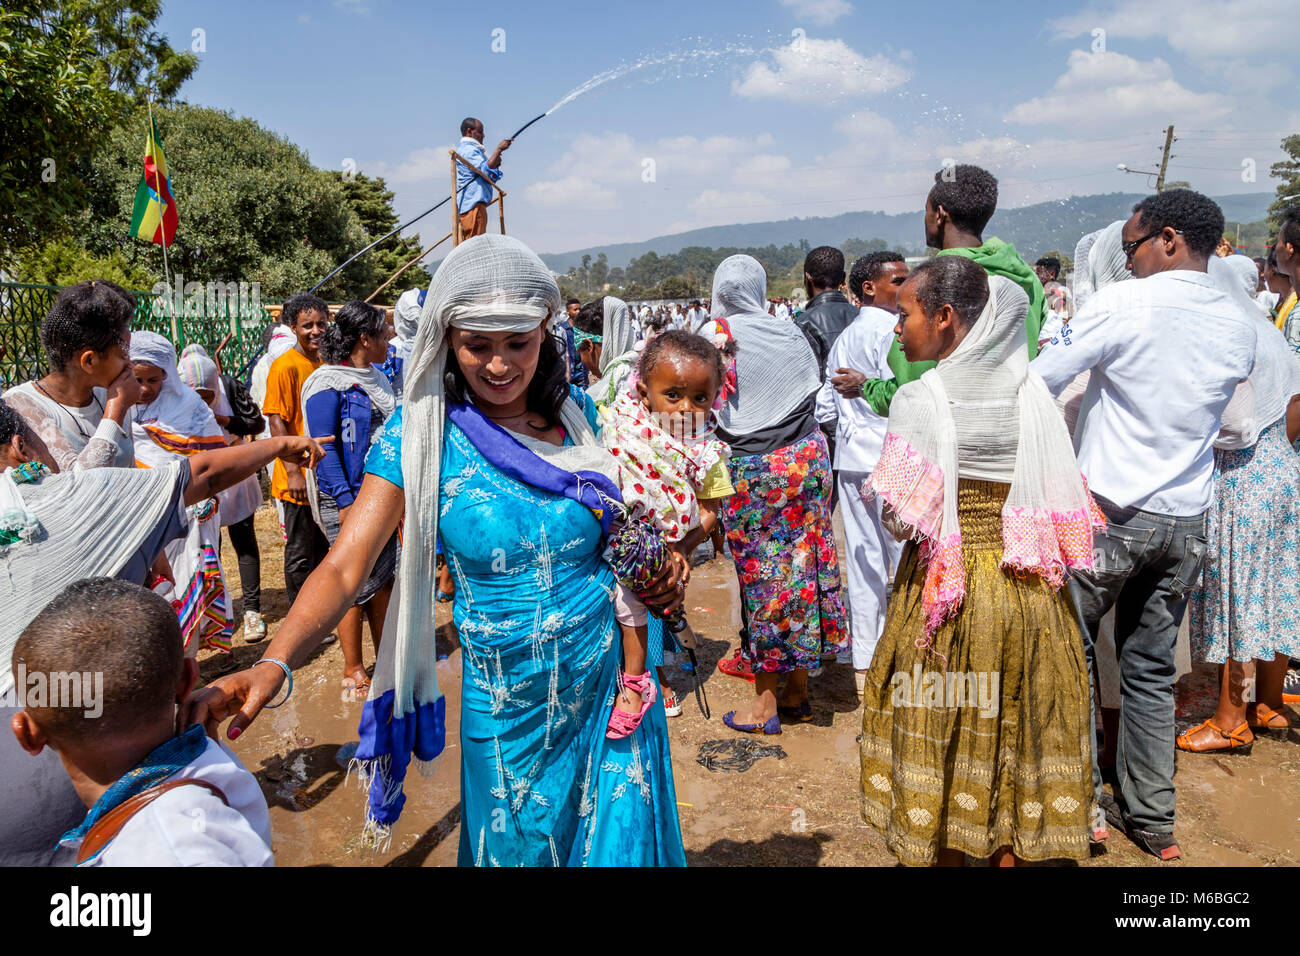 Ethiopian Christians Are Sprinkled With Blessed Water To Celebrate The Baptism Of Jesus In The Jordan River, Timkat (Epiphany), Addis Ababa, Ethiopia Stock Photo